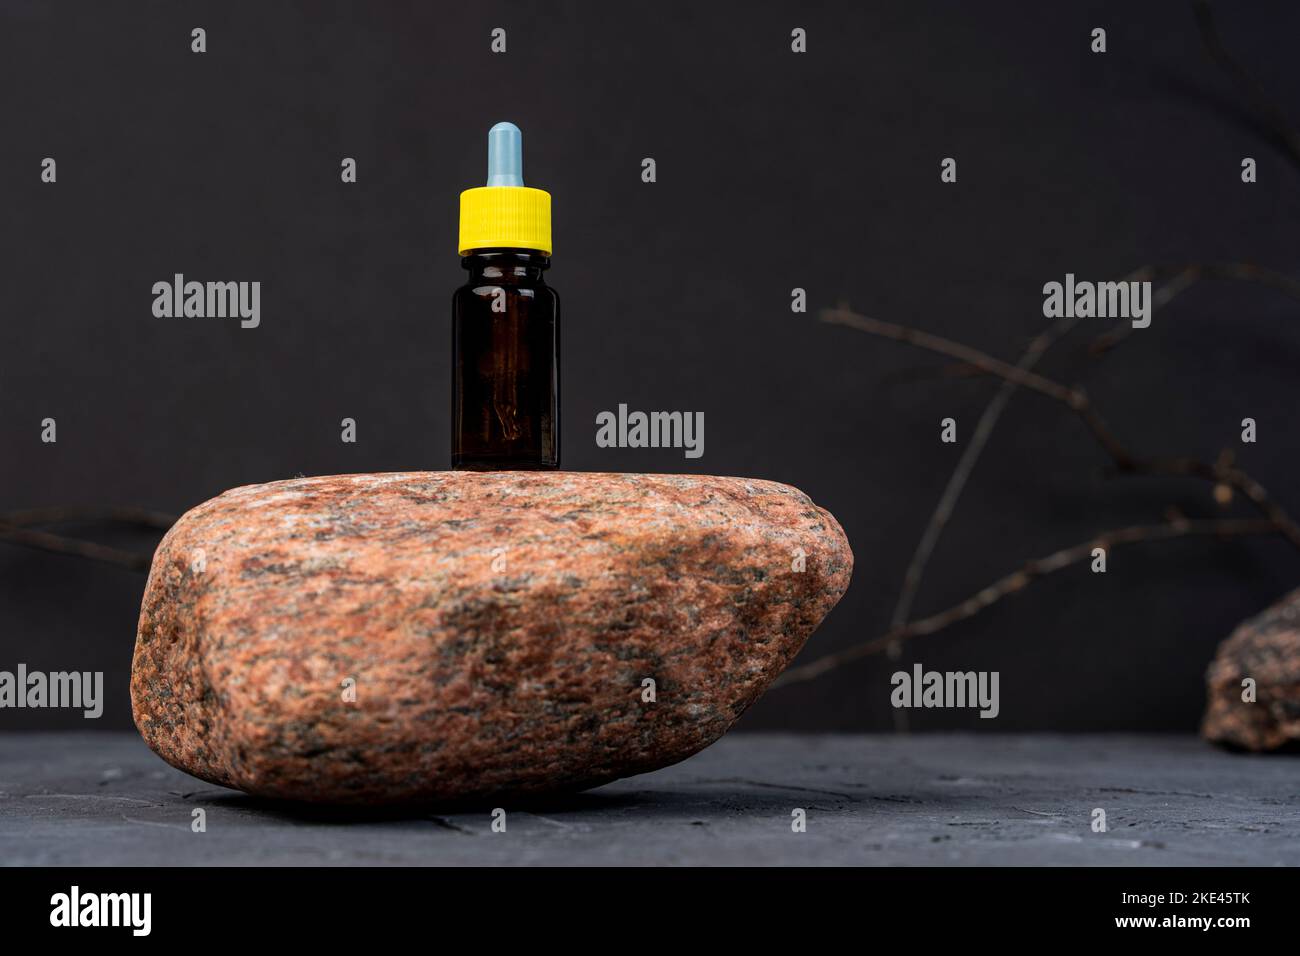 dropper bottle for cosmetics stands on natural stone, black background Stock Photo